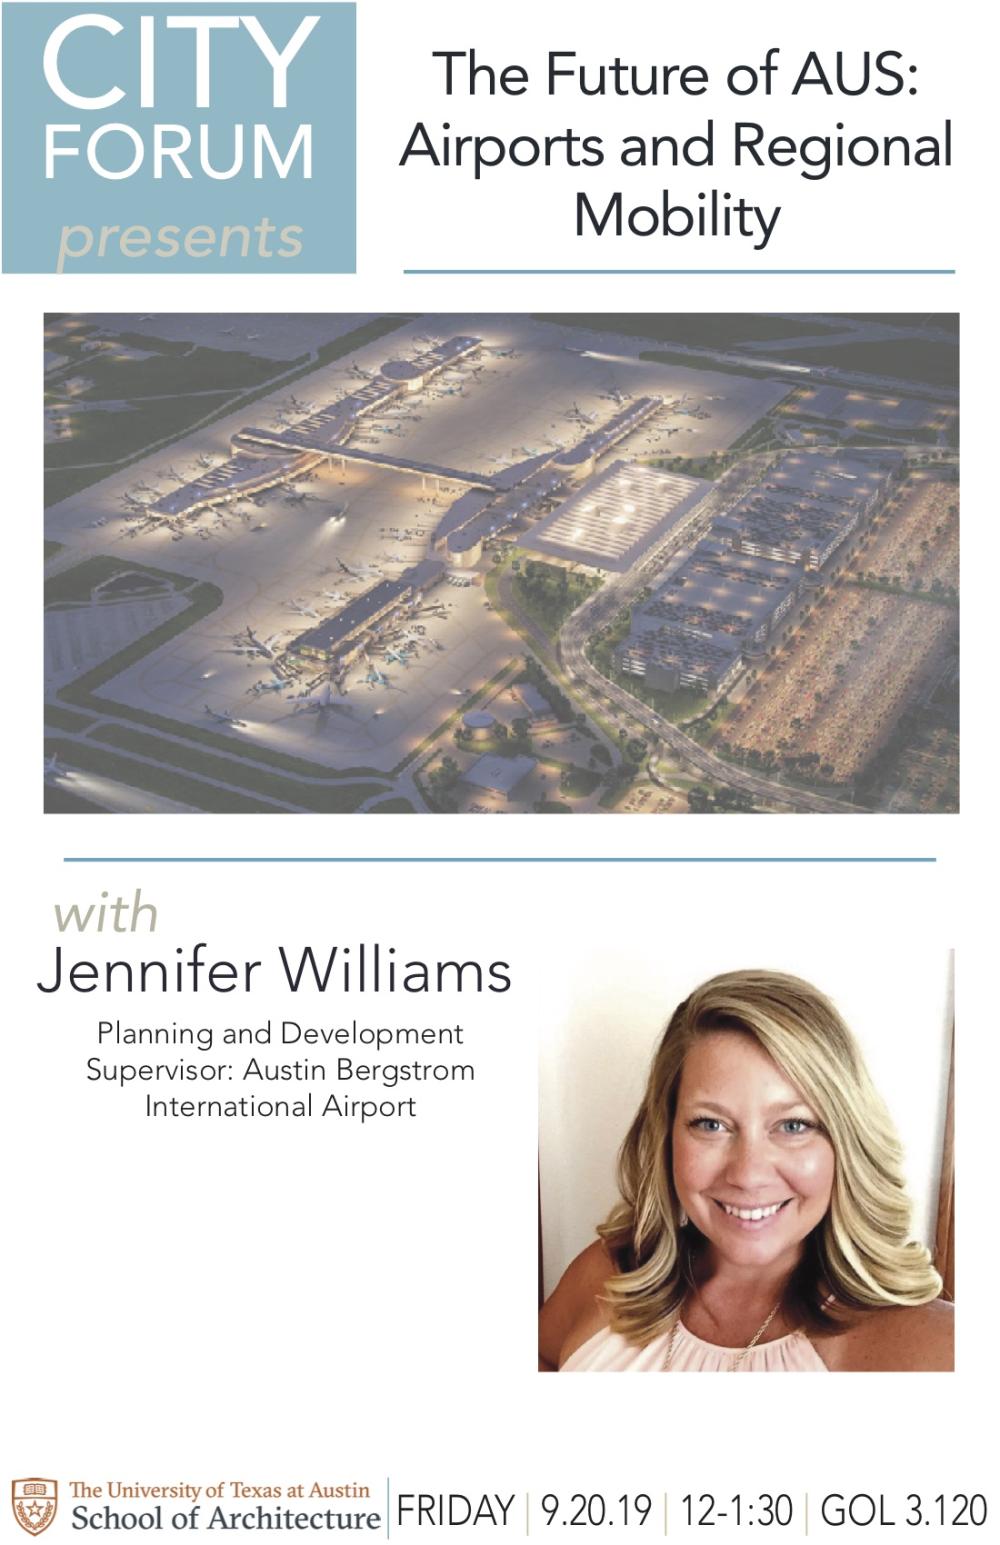 Poster of Jennifer Williams with a 3D rendering of Austin Bergstrom International Aiprport's 20 year plan